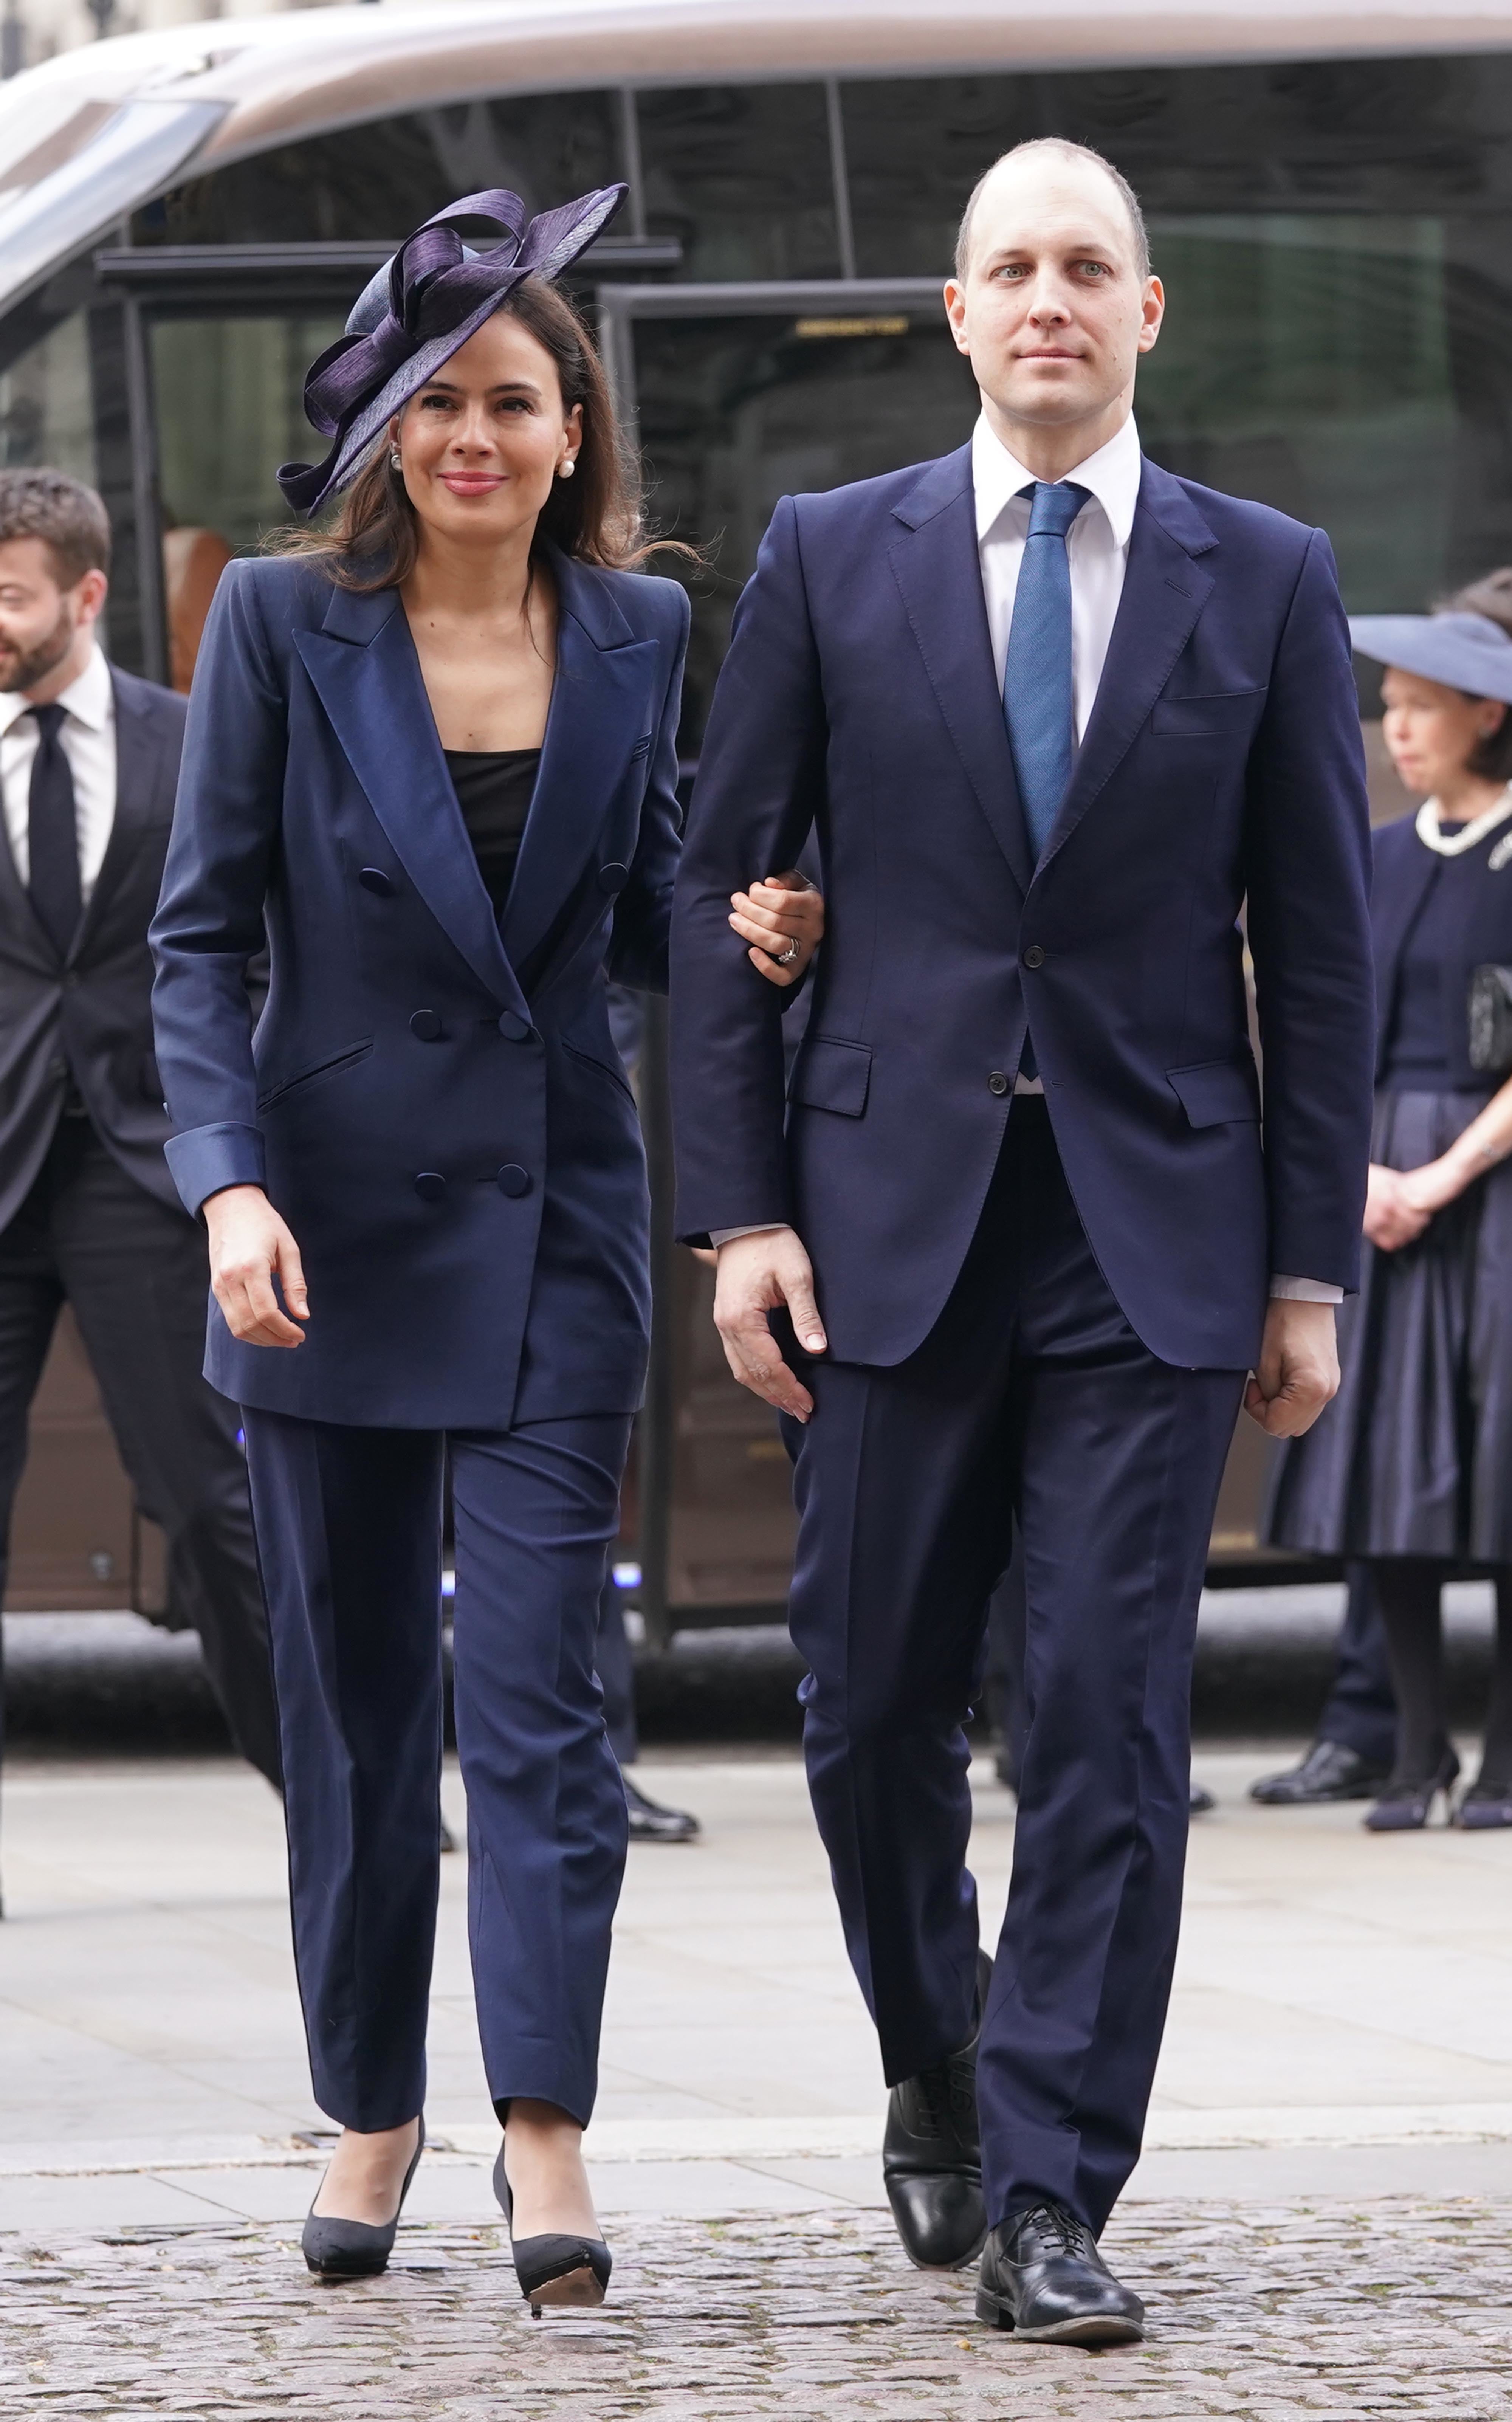 Lady Frederick Windsor and Lord Frederick Windsor arriving for a Service of Thanksgiving for the life of the Duke of Edinburgh, at Westminster Abbey in London (Kirsty O’Connor/PA)